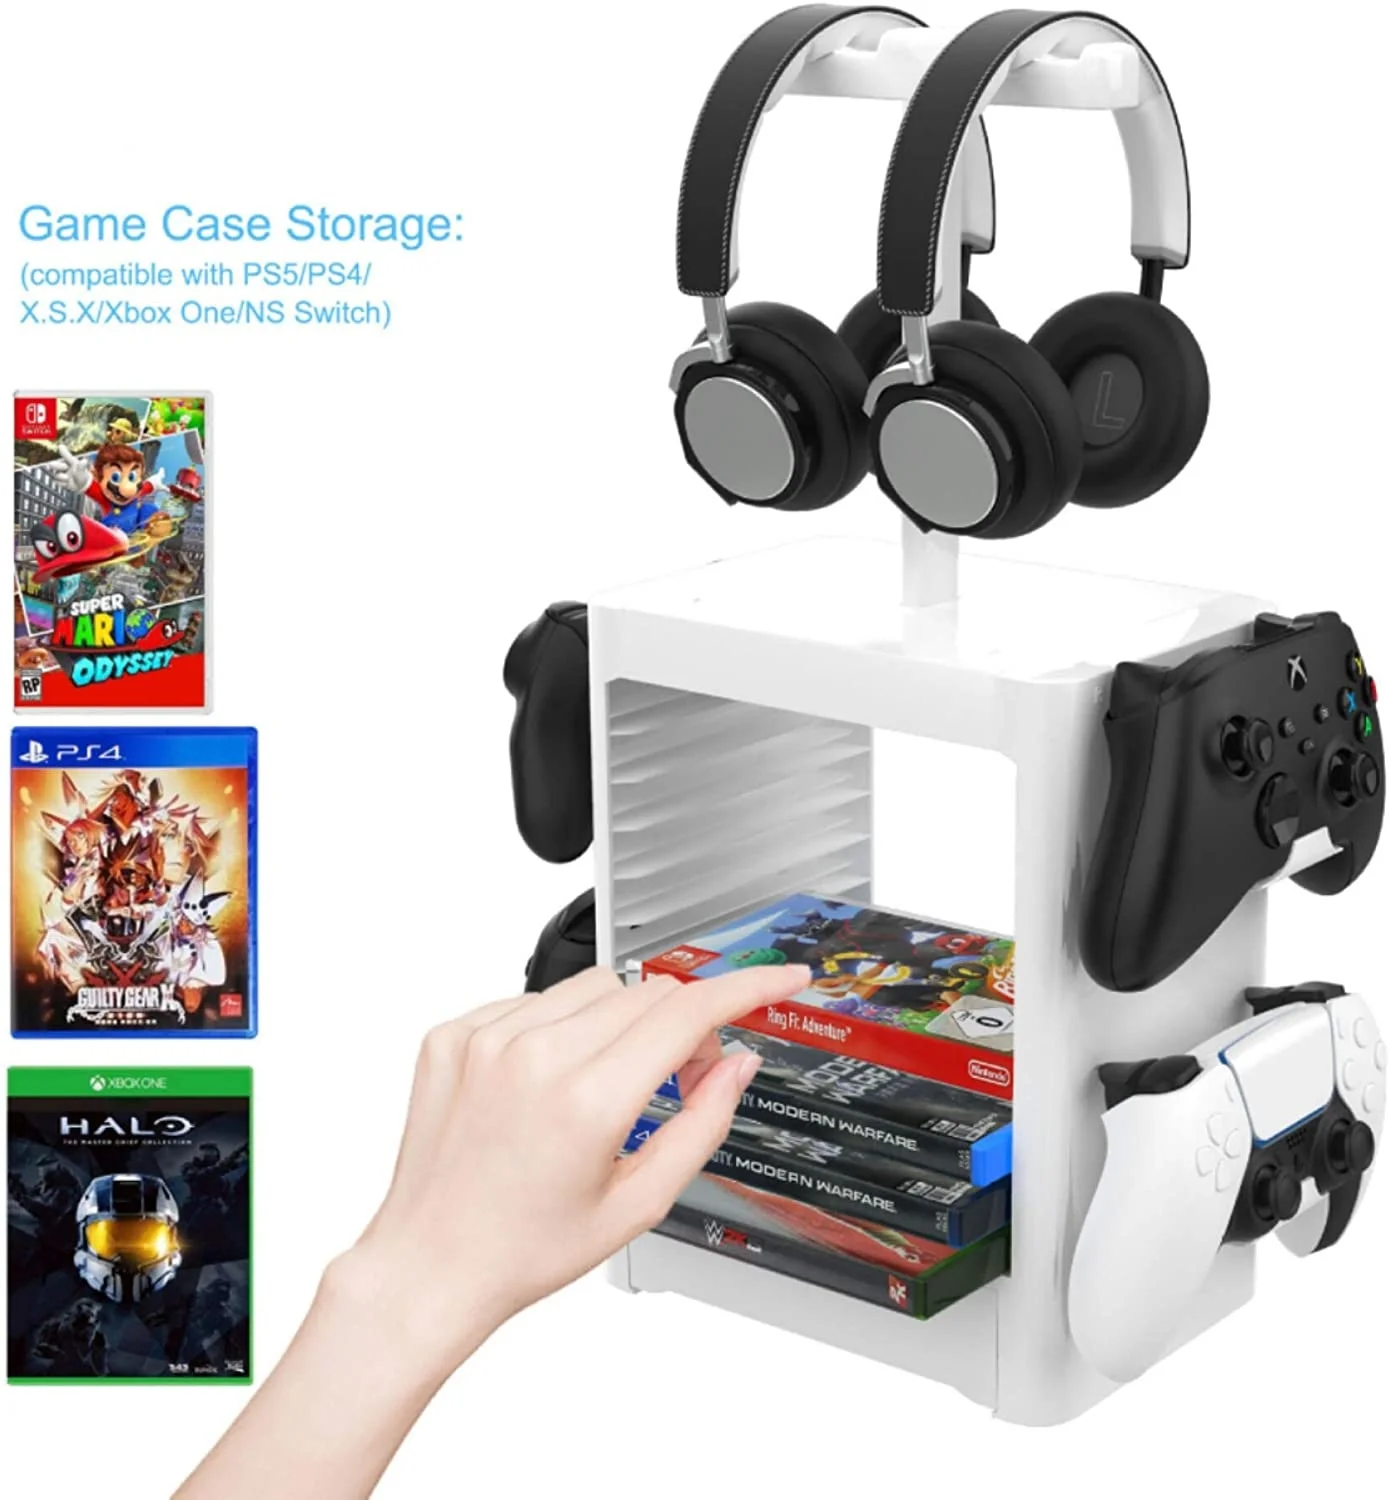 

Organizer For PS5 Ninendo Switch Game Card Storage Stand For Xbox PS 4 Joy-Con Controllers, Pro Controllers, Headsets Holder